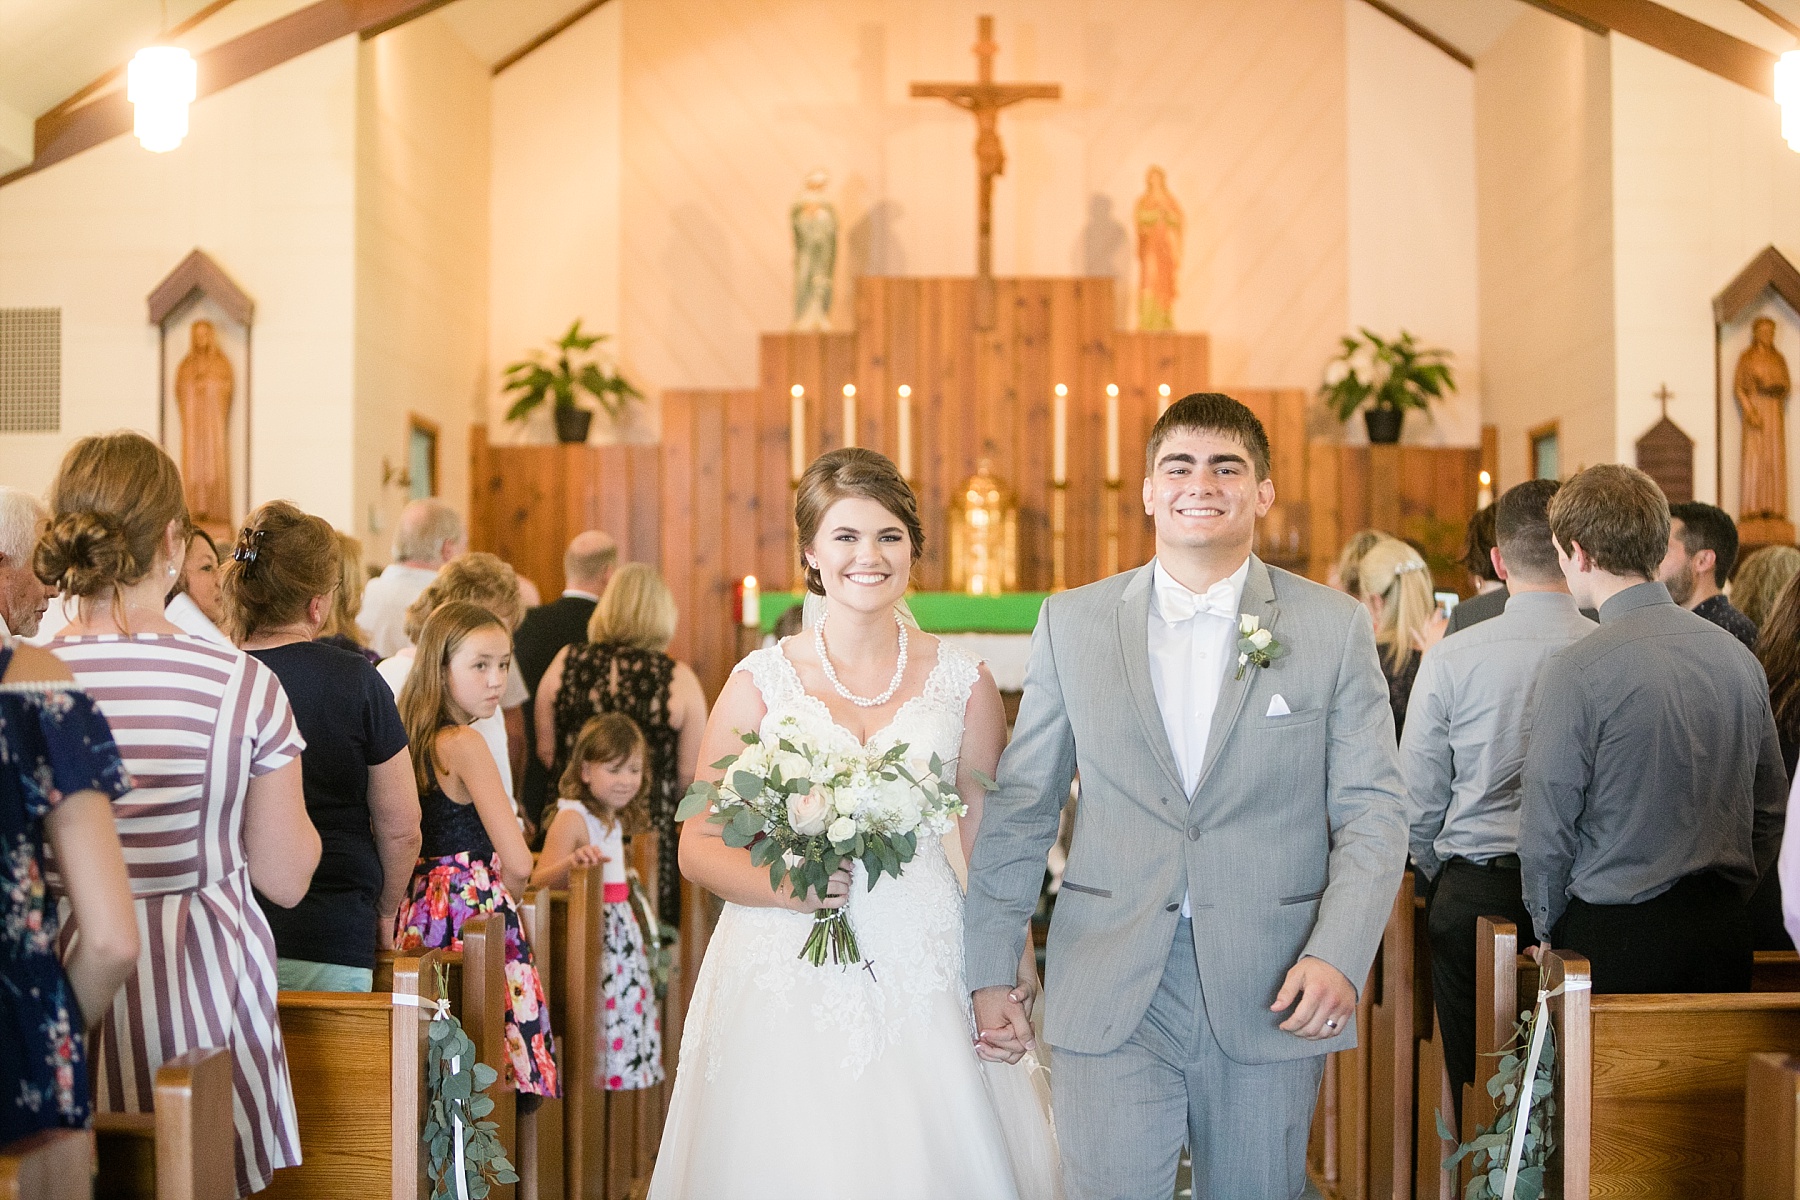 Married at the church between their hometowns at St. Anthony de Padua, and they danced the night away at their Paradise Shores 4 wedding.